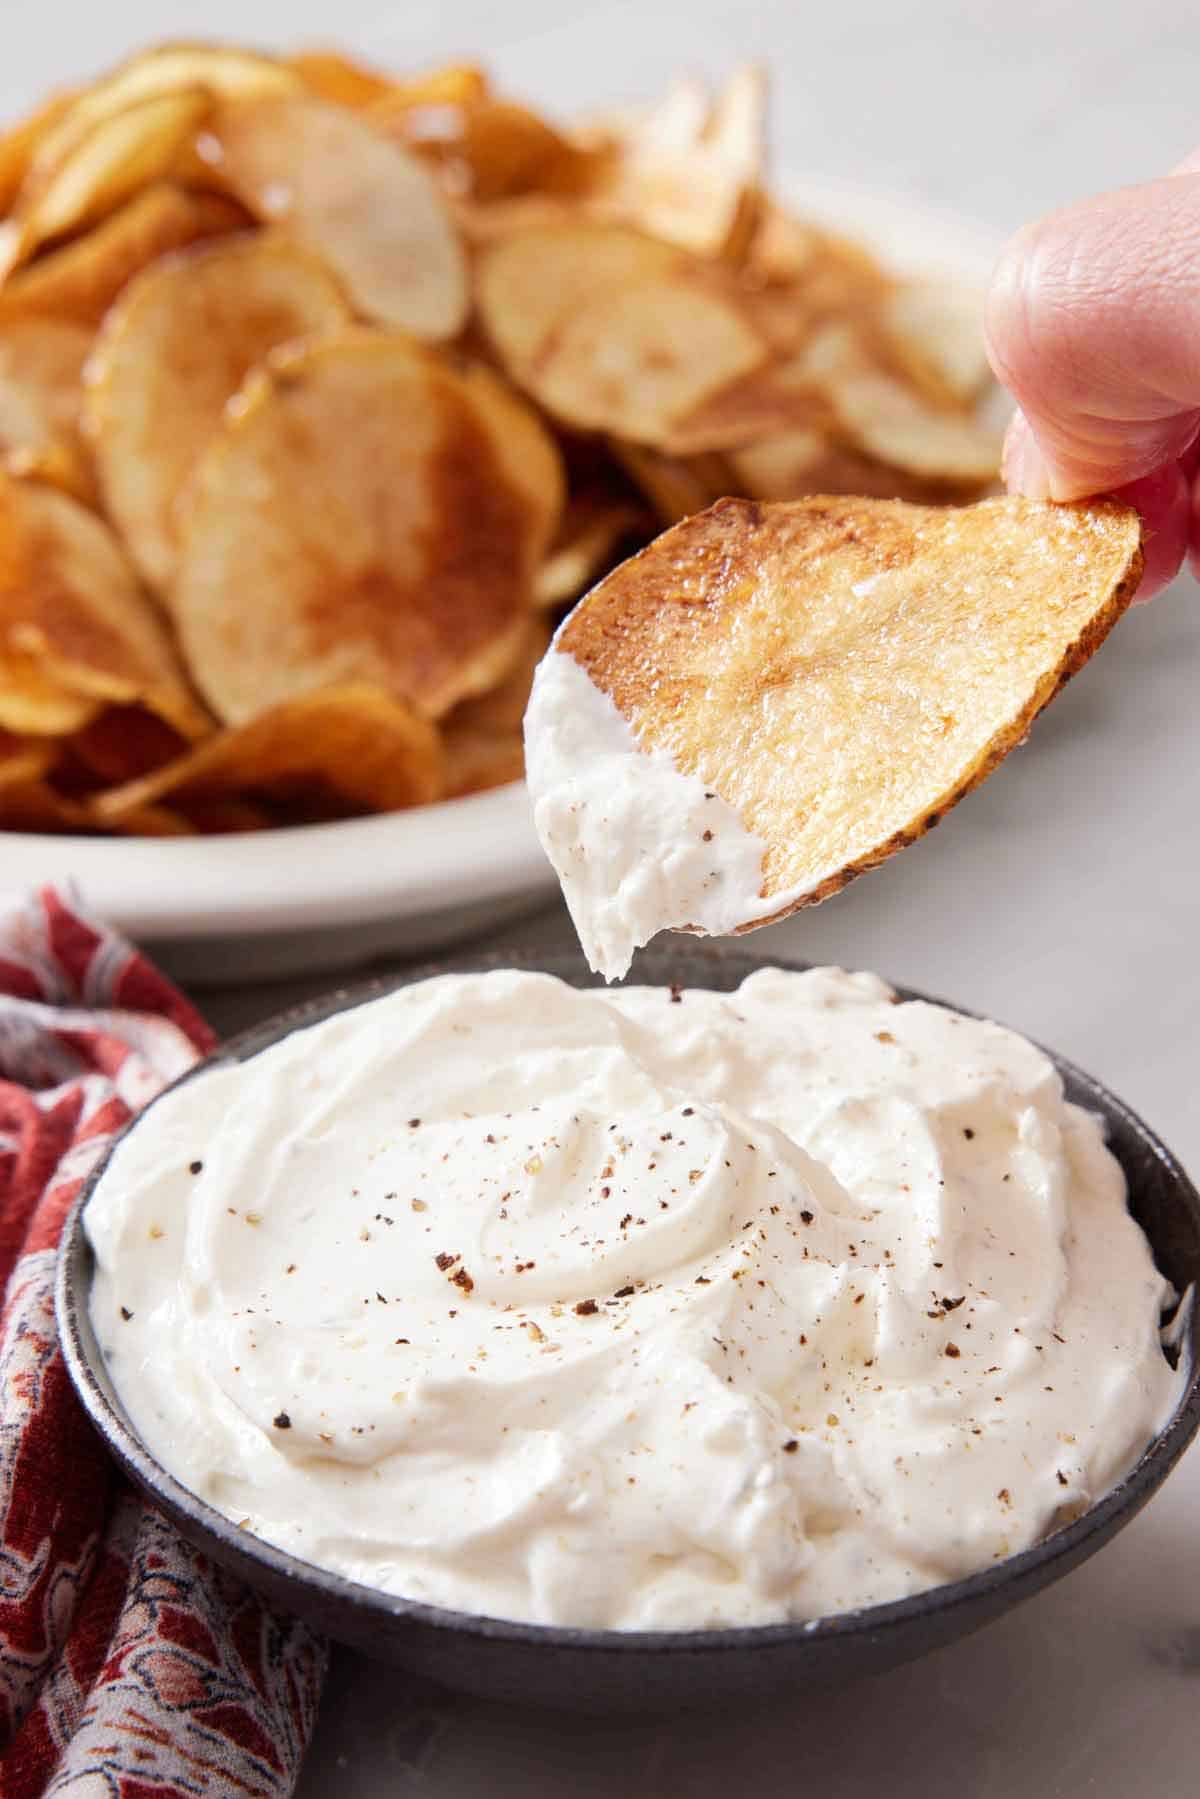 A homemade potato chip dipped into a creamy white dip and lifted. More chips in the background in a platter.